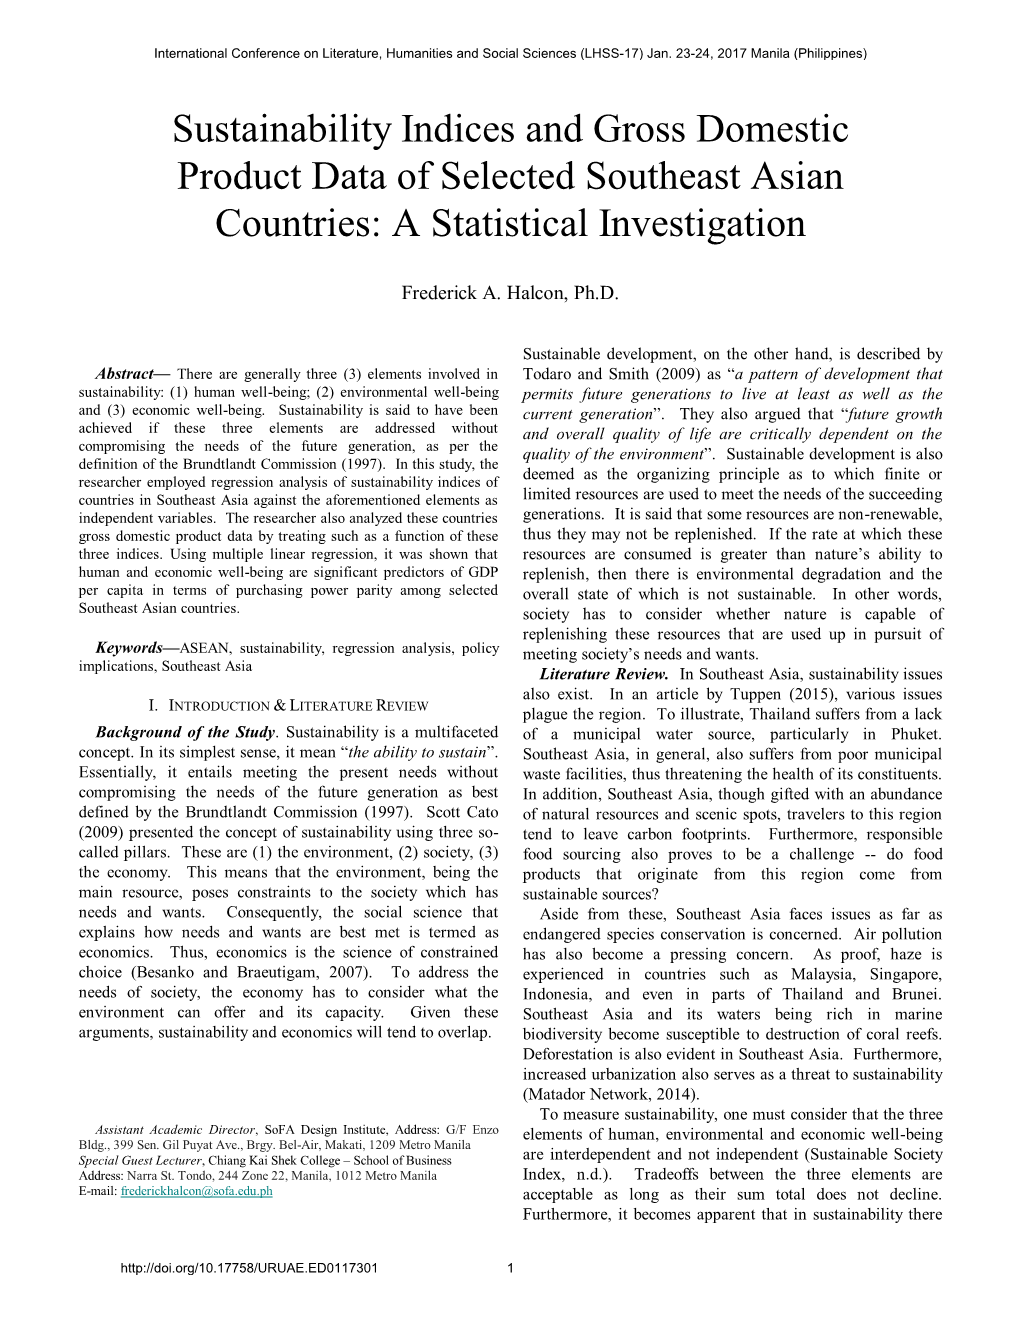 Sustainability Indices and Gross Domestic Product Data of Selected Southeast Asian Countries: a Statistical Investigation